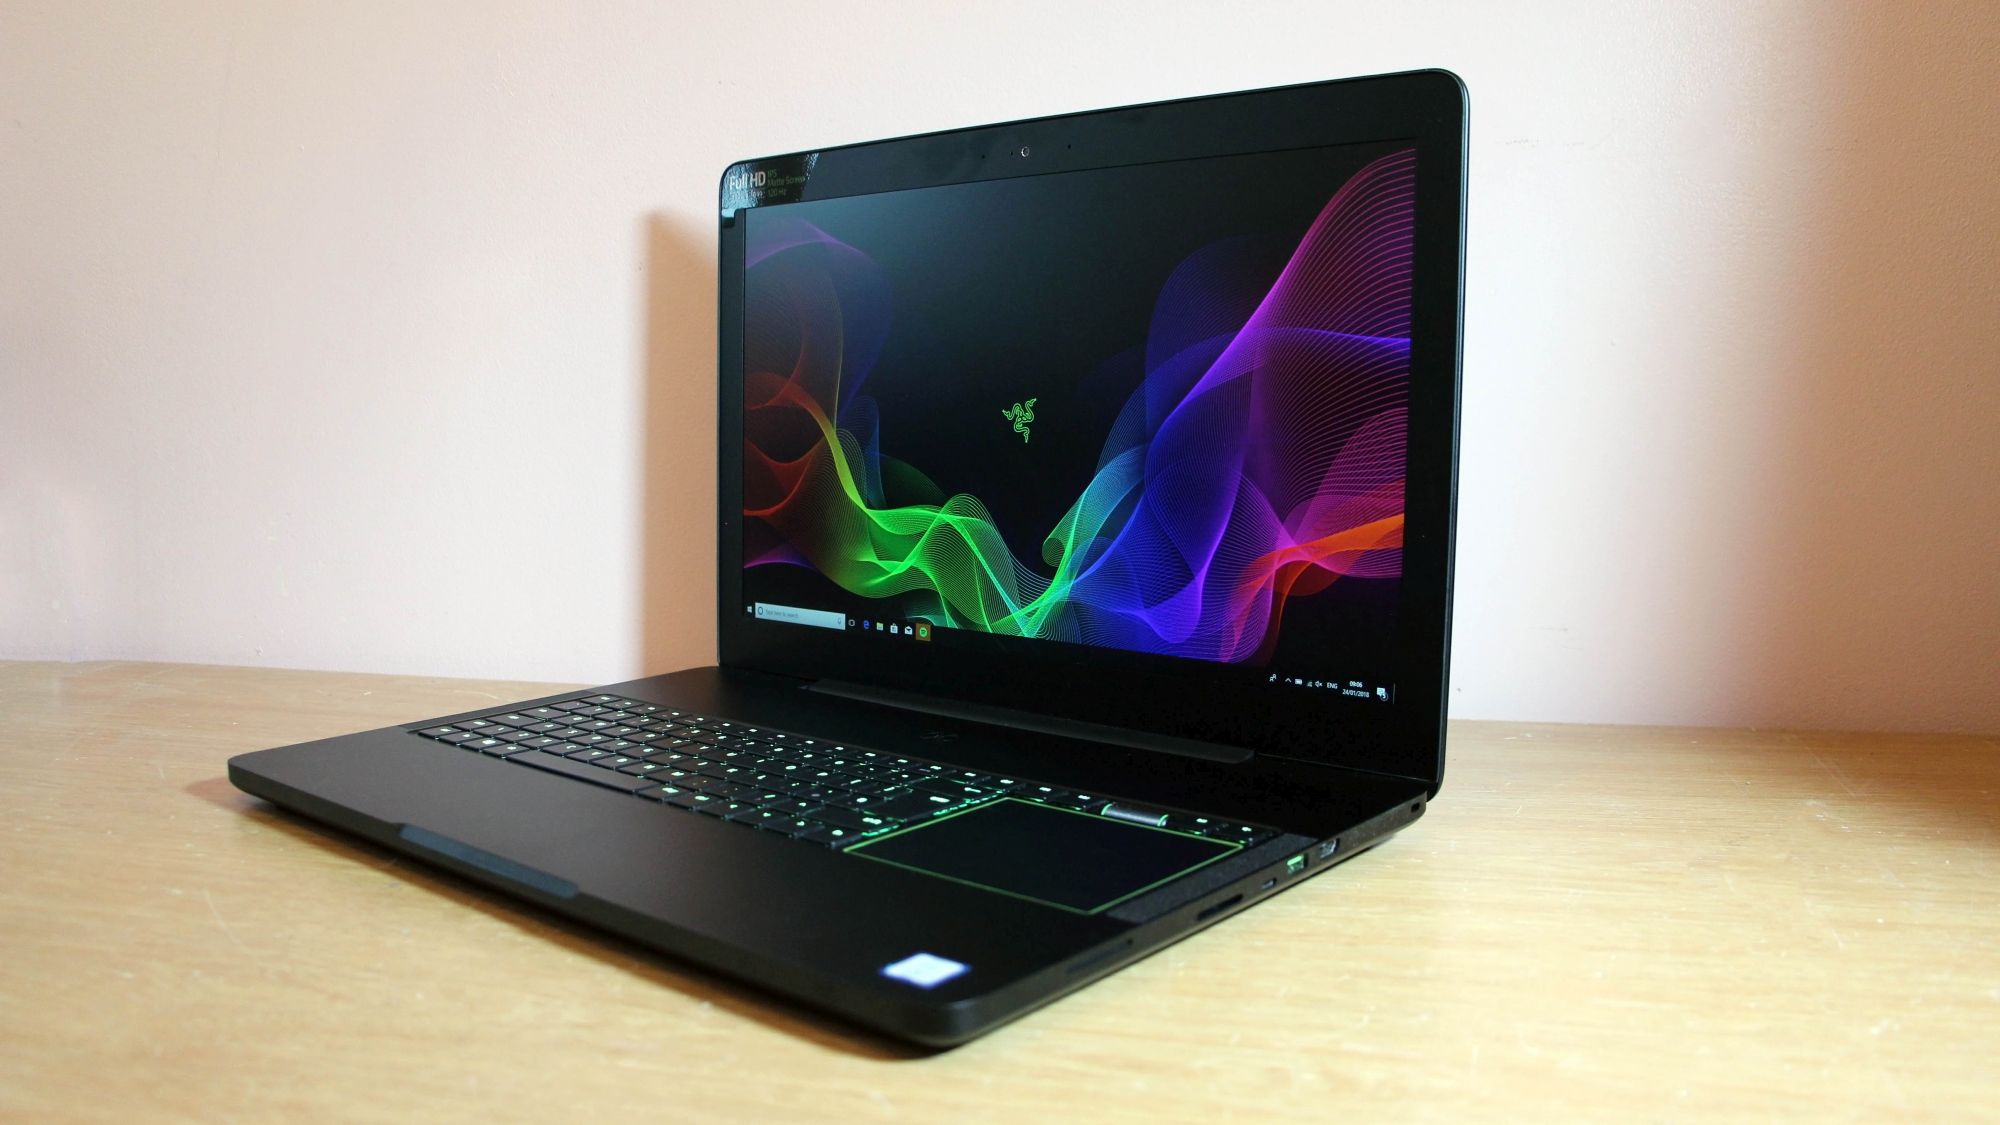 Ultimate Are Gaming Laptops Good For Work Too in Bedroom